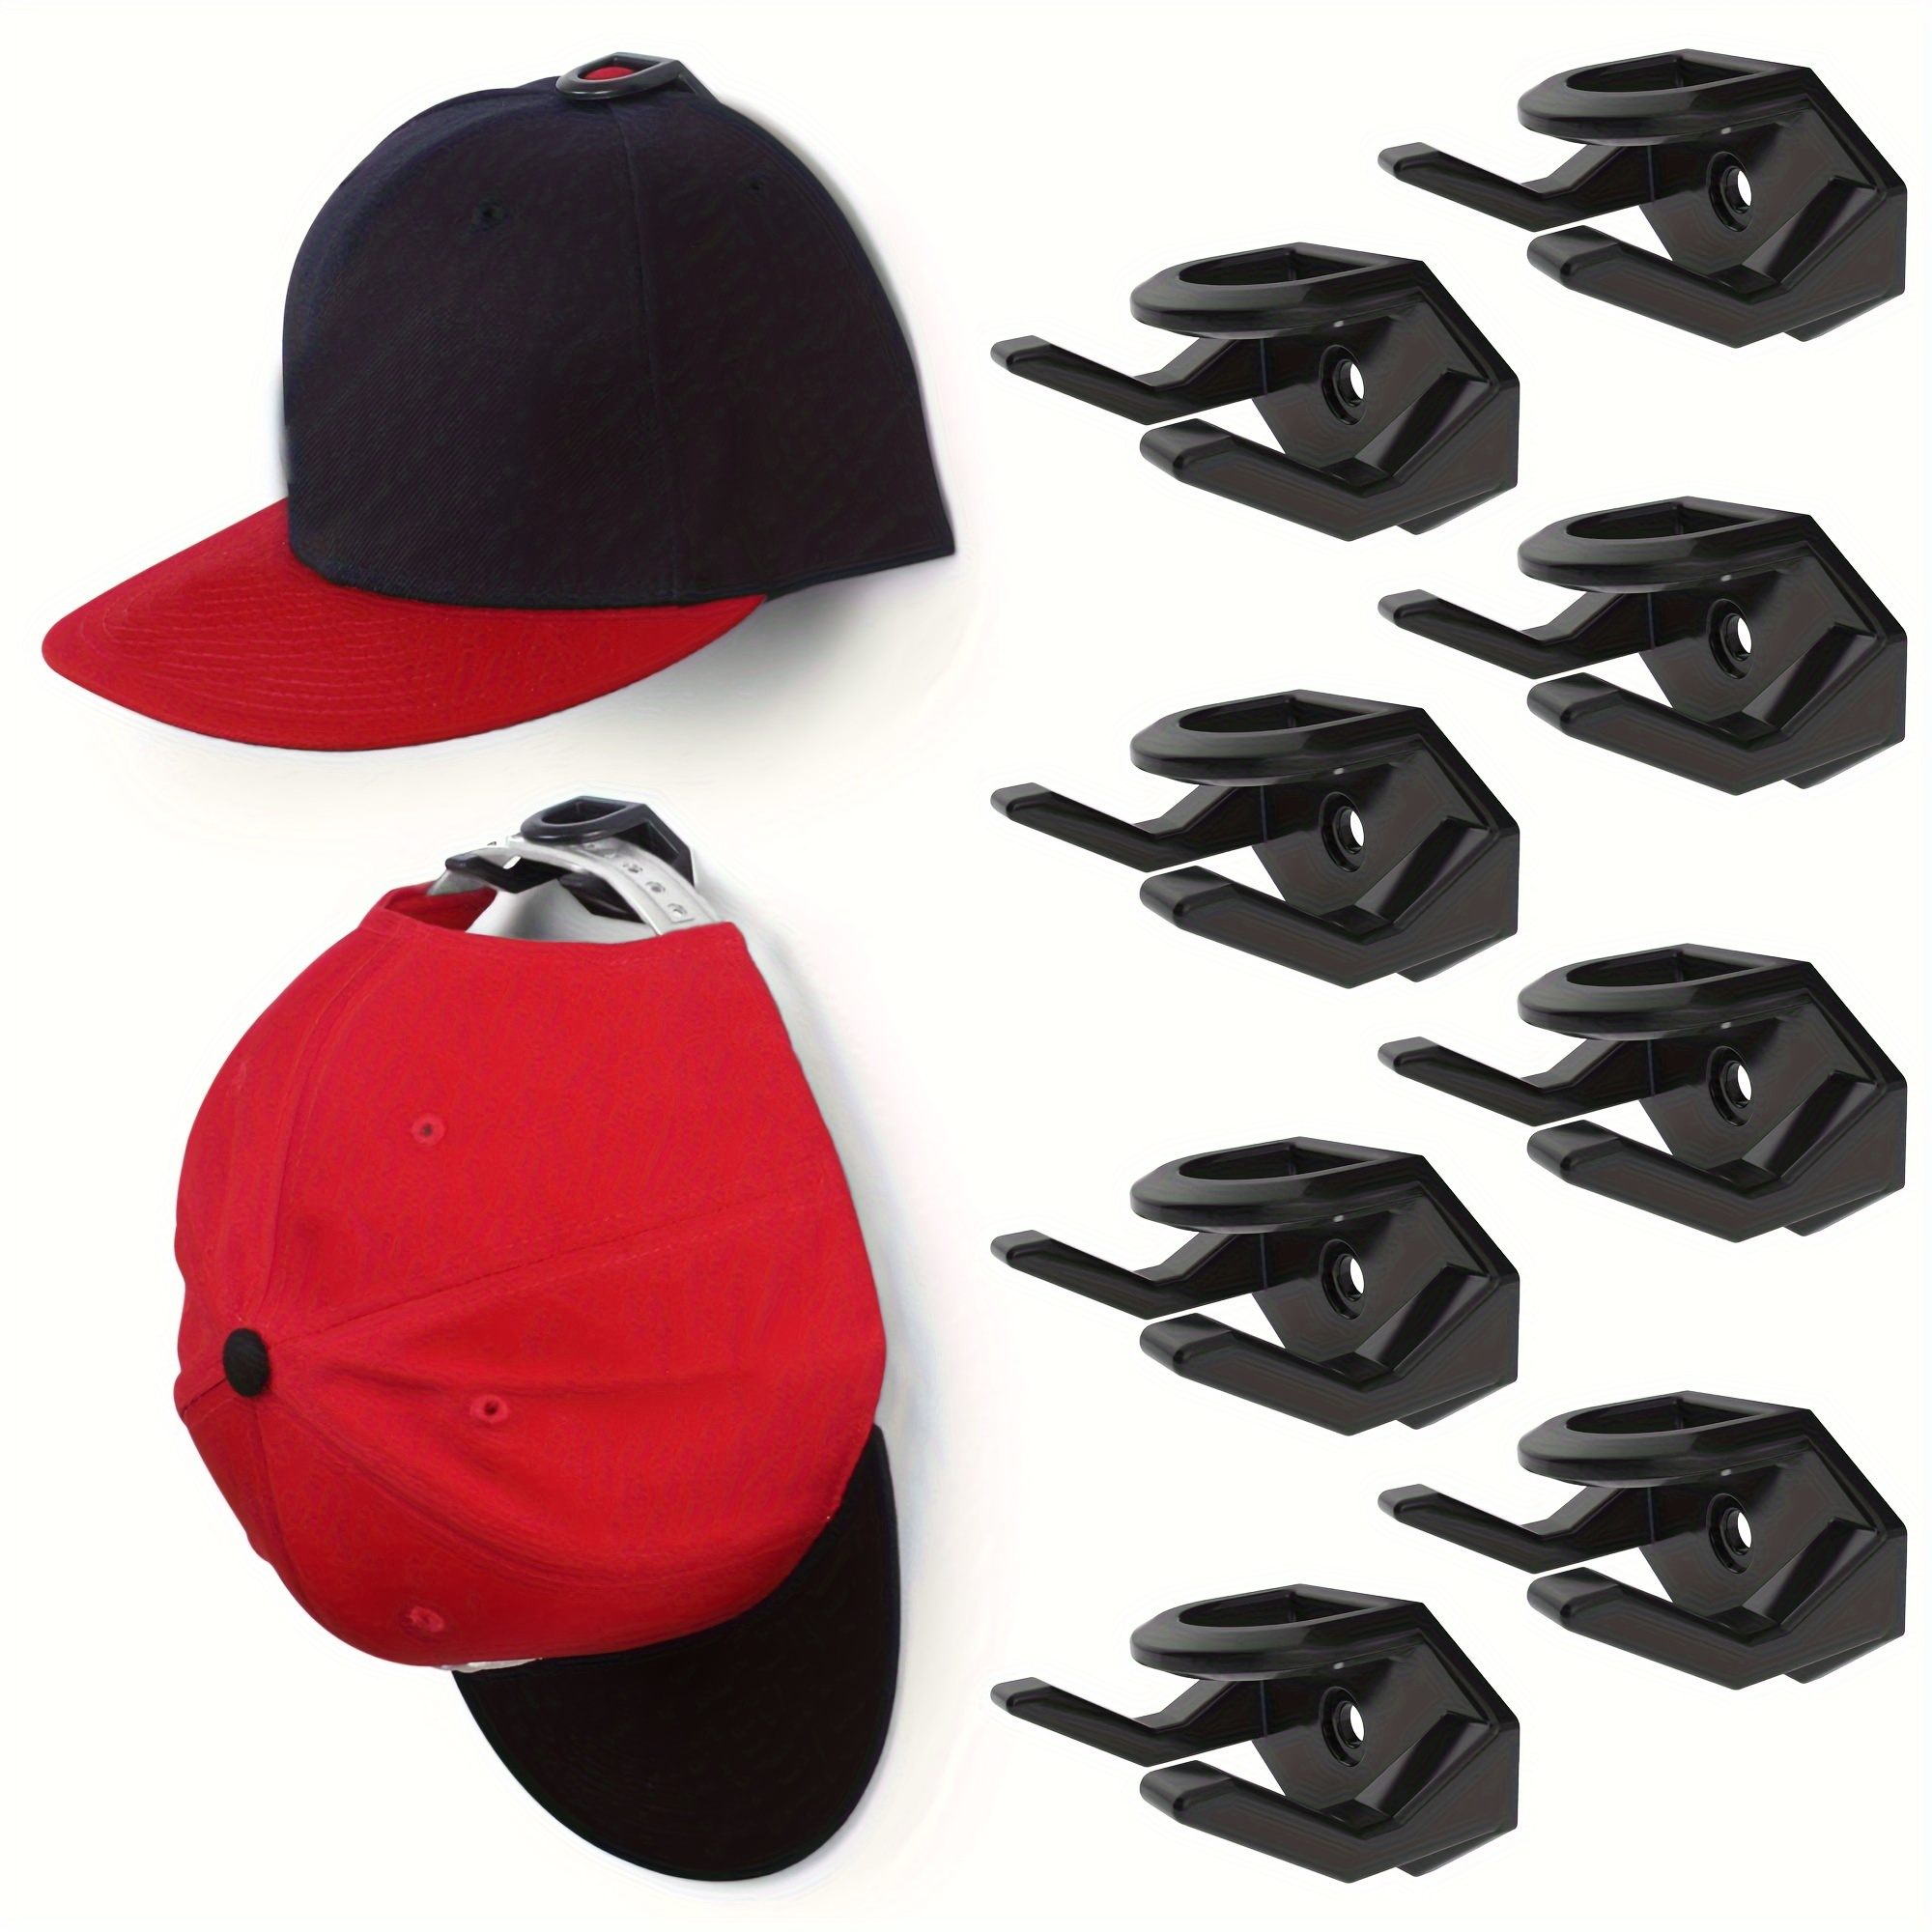 

8pcs Strong Hold Adhesive Hat Hooks For Wall - Minimalist Hat Rack For Baseball Caps - Easy To Install And Use - Perfect For Displaying Hats